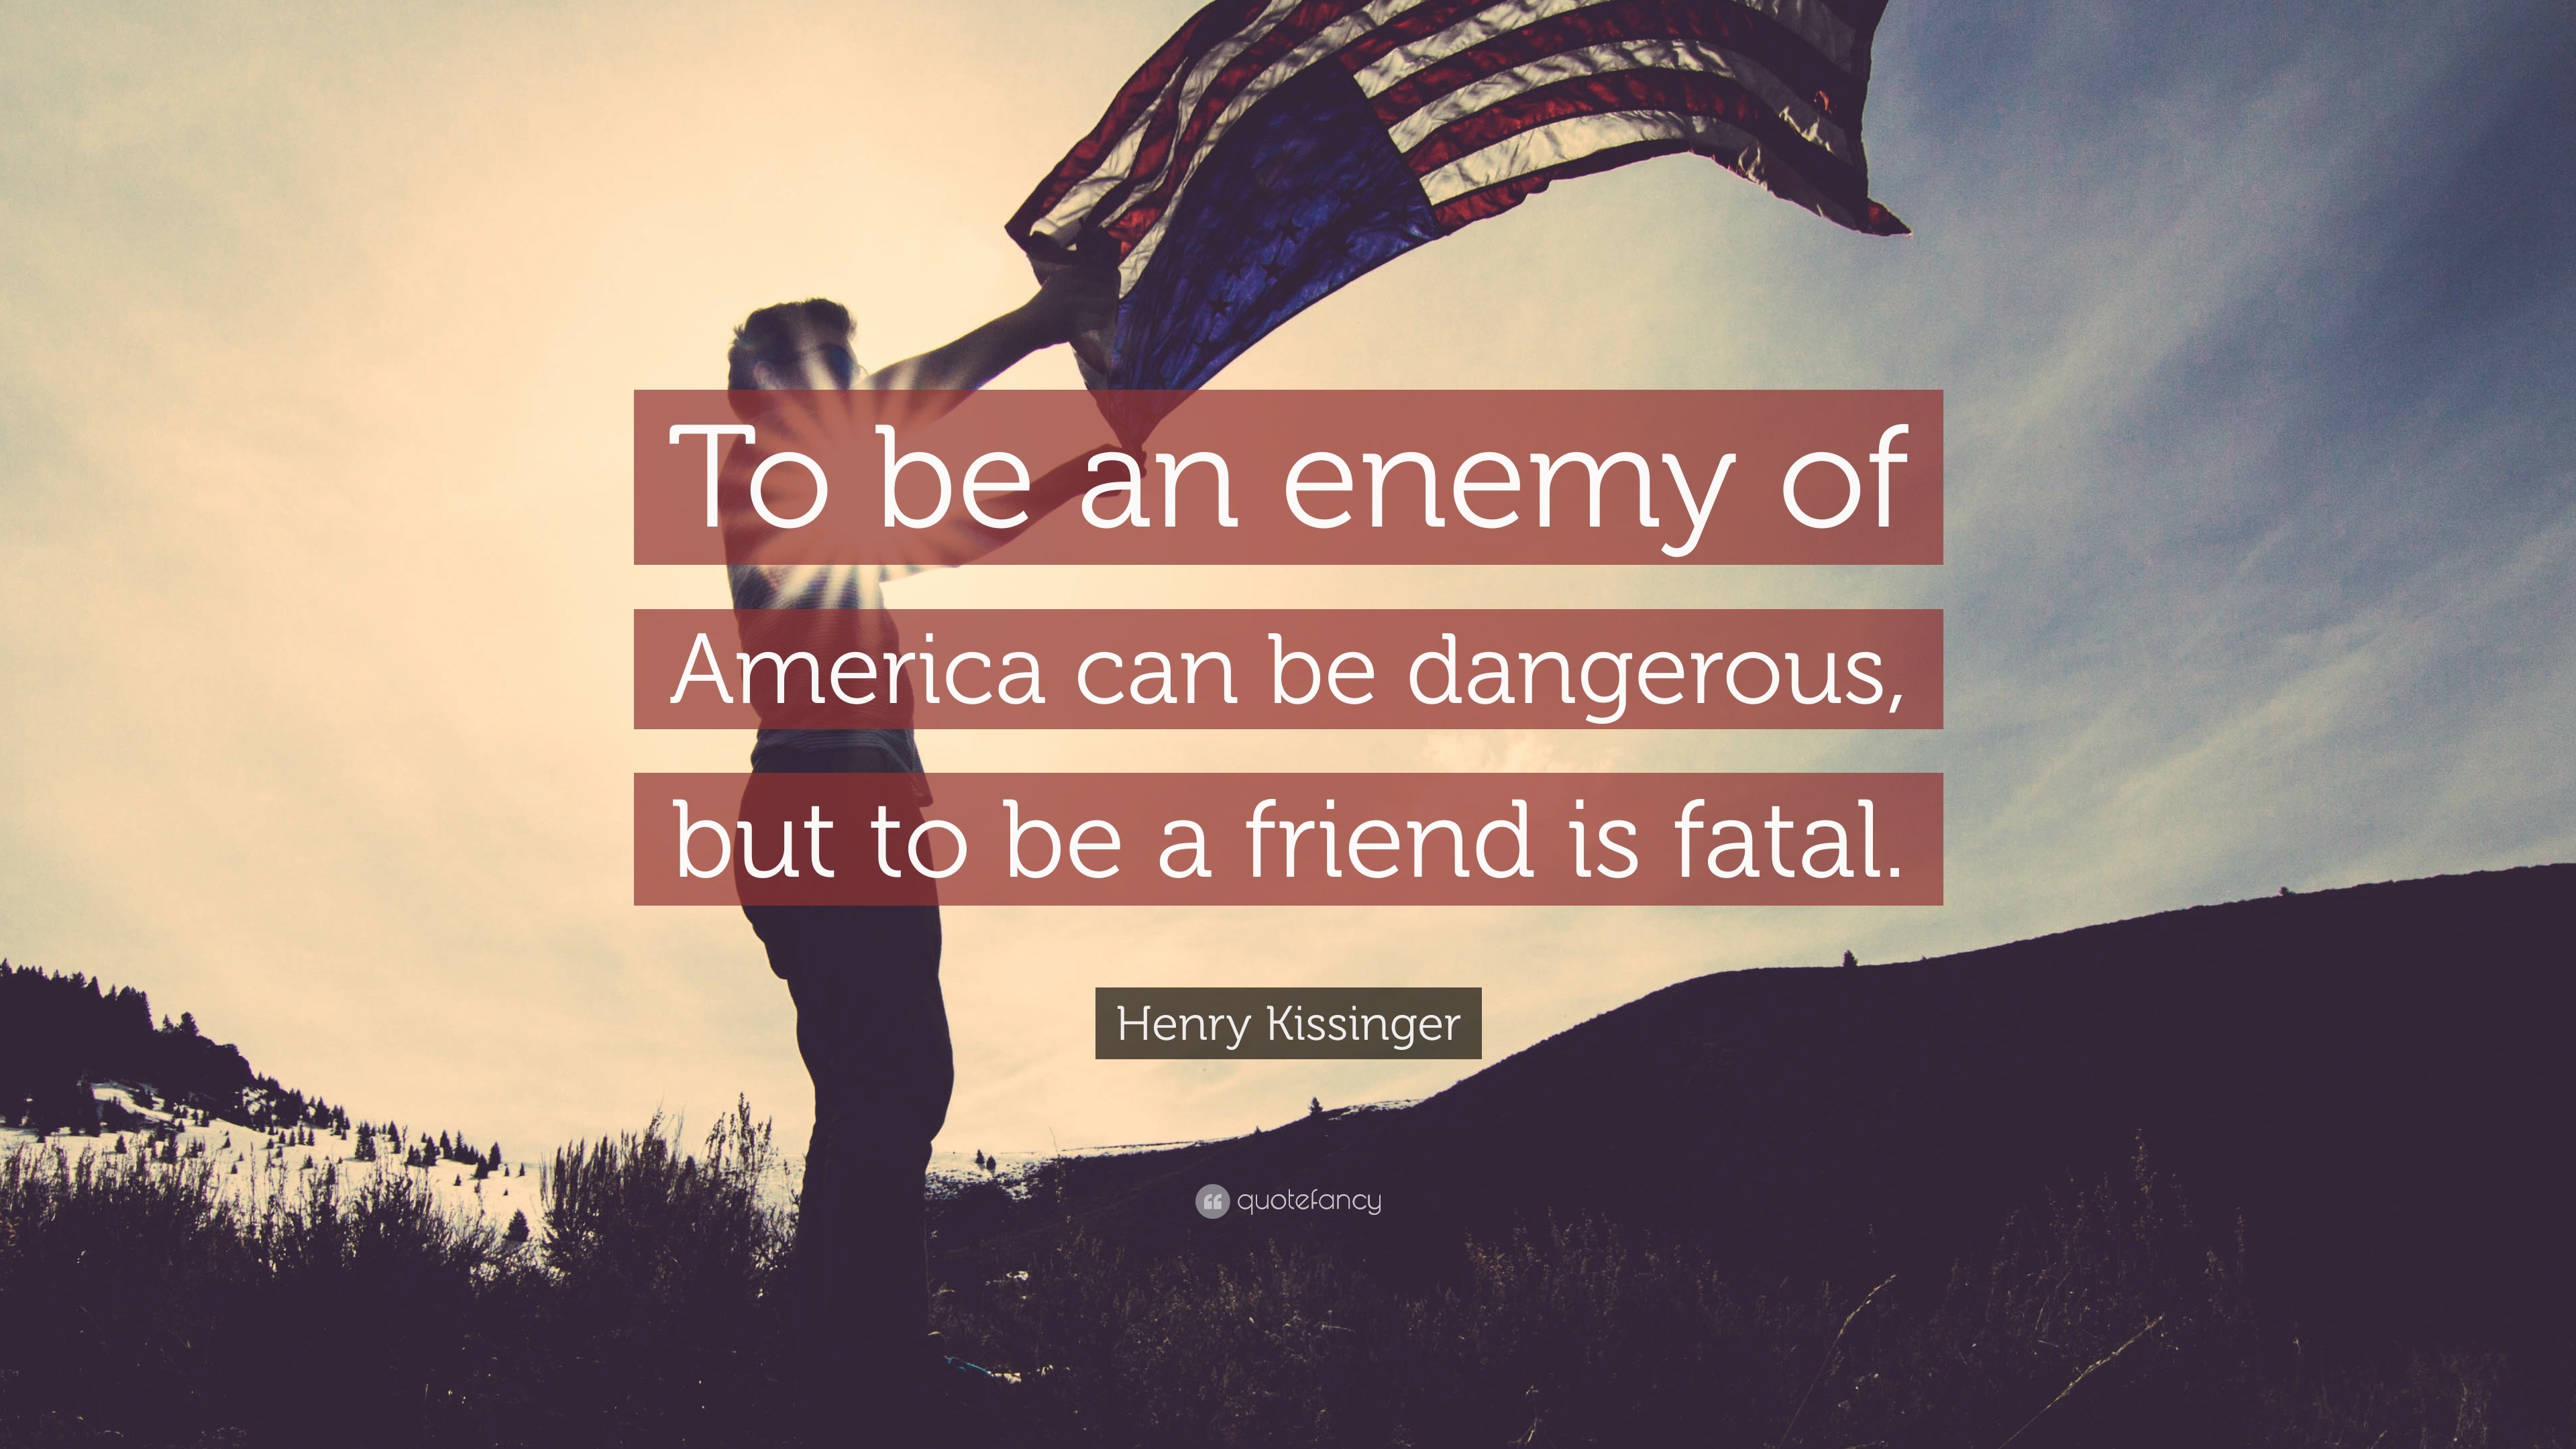 674323-Henry-Kissinger-Quote-To-be-an-enemy-of-America-can-be-dangerous.jpg